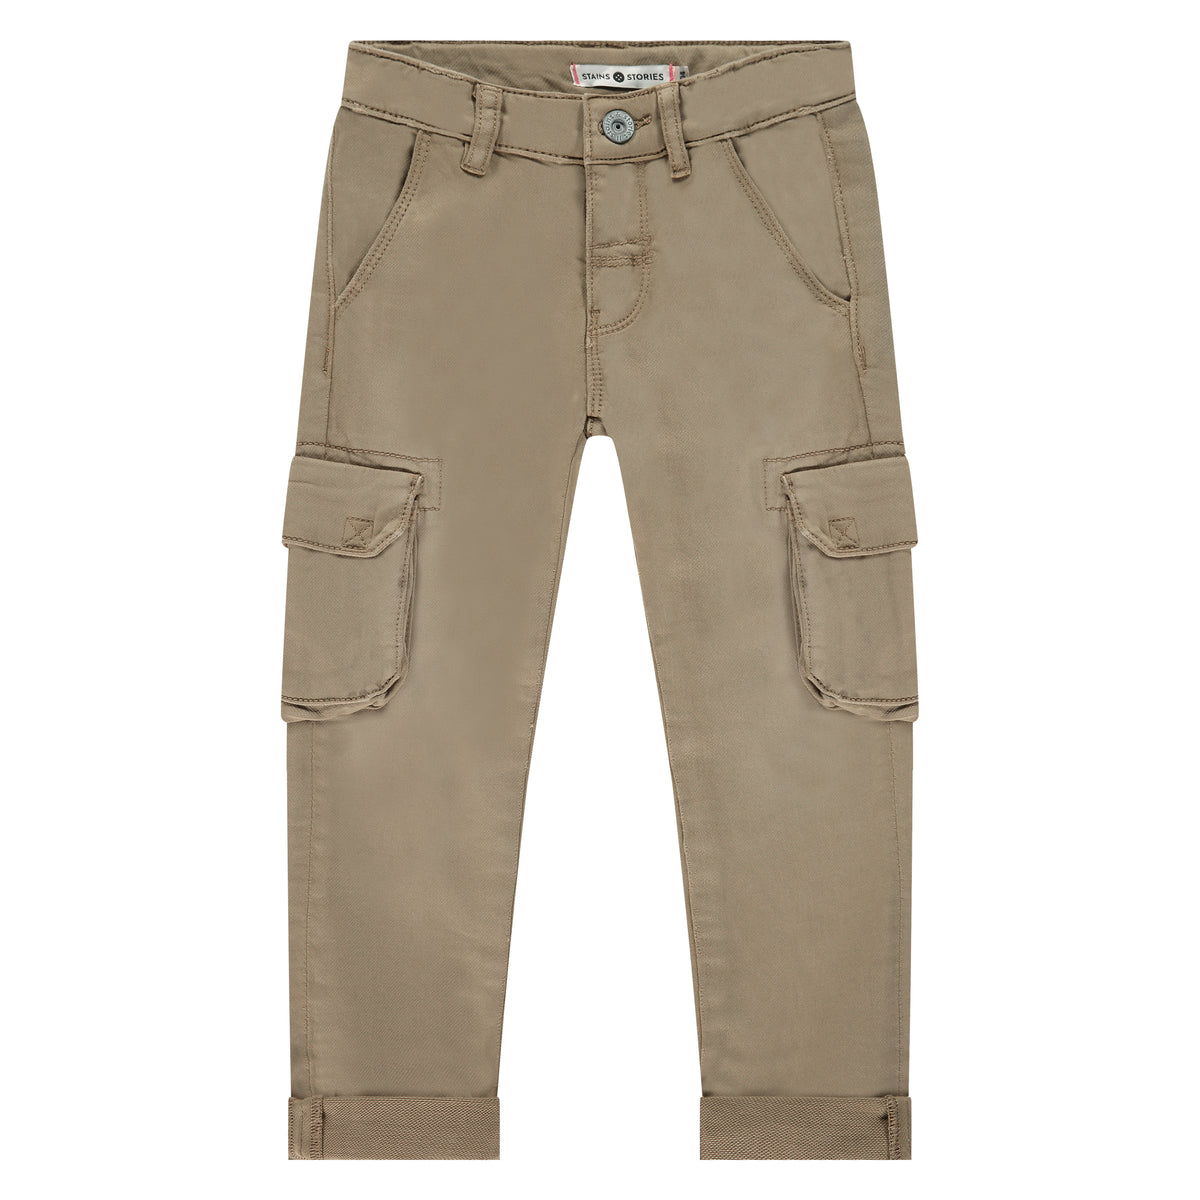 Boys worker pants sand, Stains & Stories